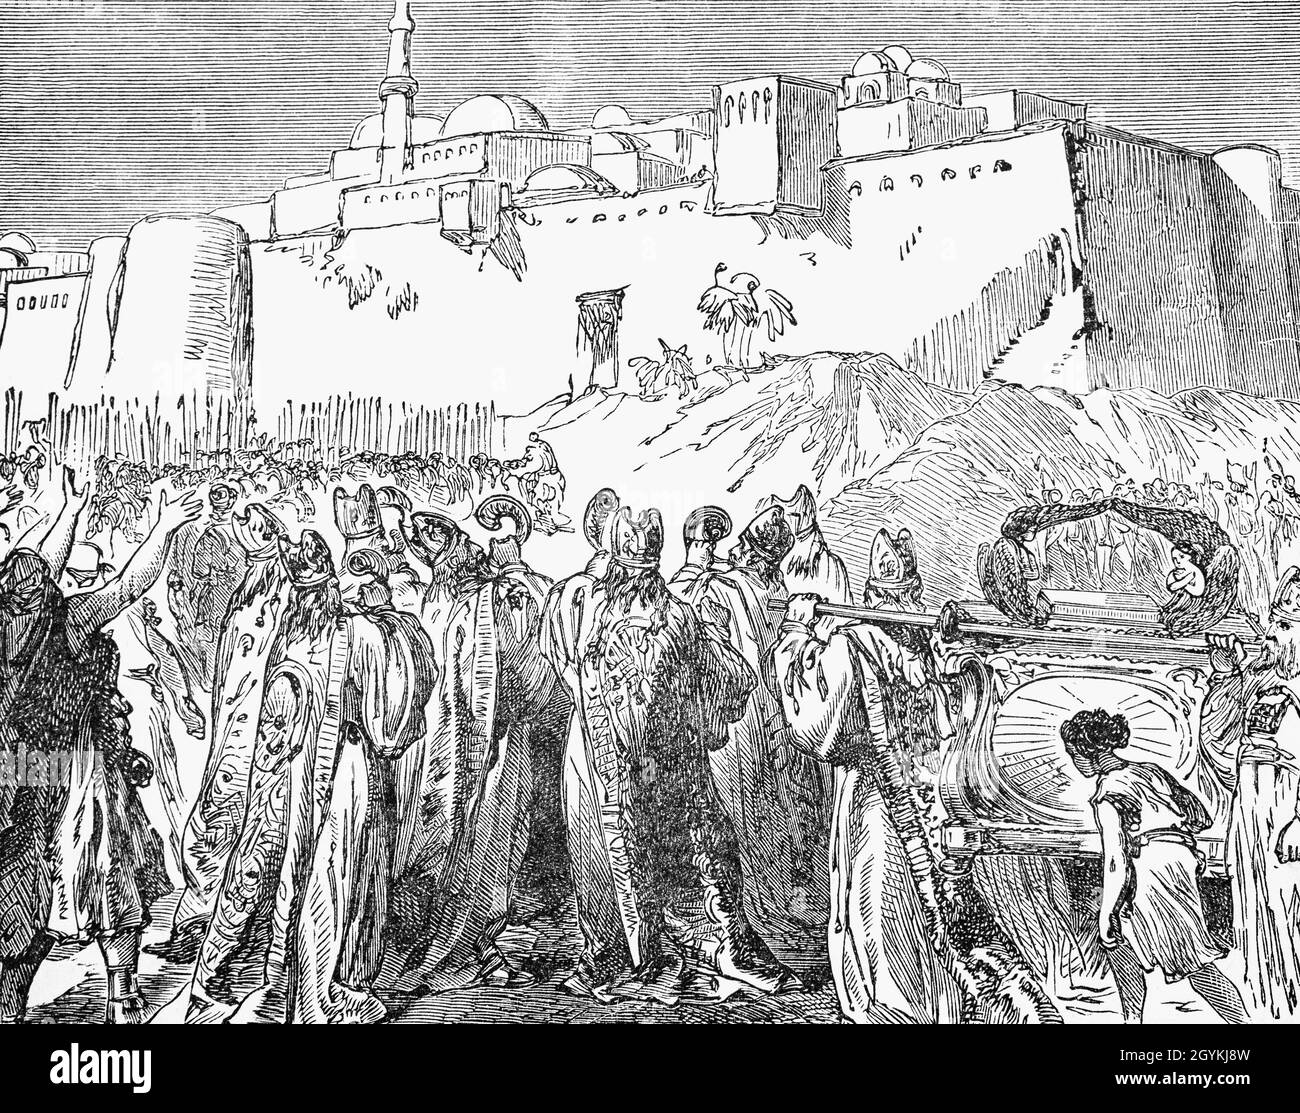 A late 19th Century illustration from the Book of Genesis of the fall of Jericho. The Israelites had entered the Promised Land and heir first battle was against the gateway city of Jericho using an unusual tactic. Priests were to carry the ark of the covenant, and seven priests, bearing seven trumpets of ram’s horns, blown continually. They circled the city once each day for six days and on the seventh day, march around the city seven times. After the seventh circuit, the priests were to make one long blast on the trumpets at which point the people shouted loudly and the wall fell down flat. Stock Photo